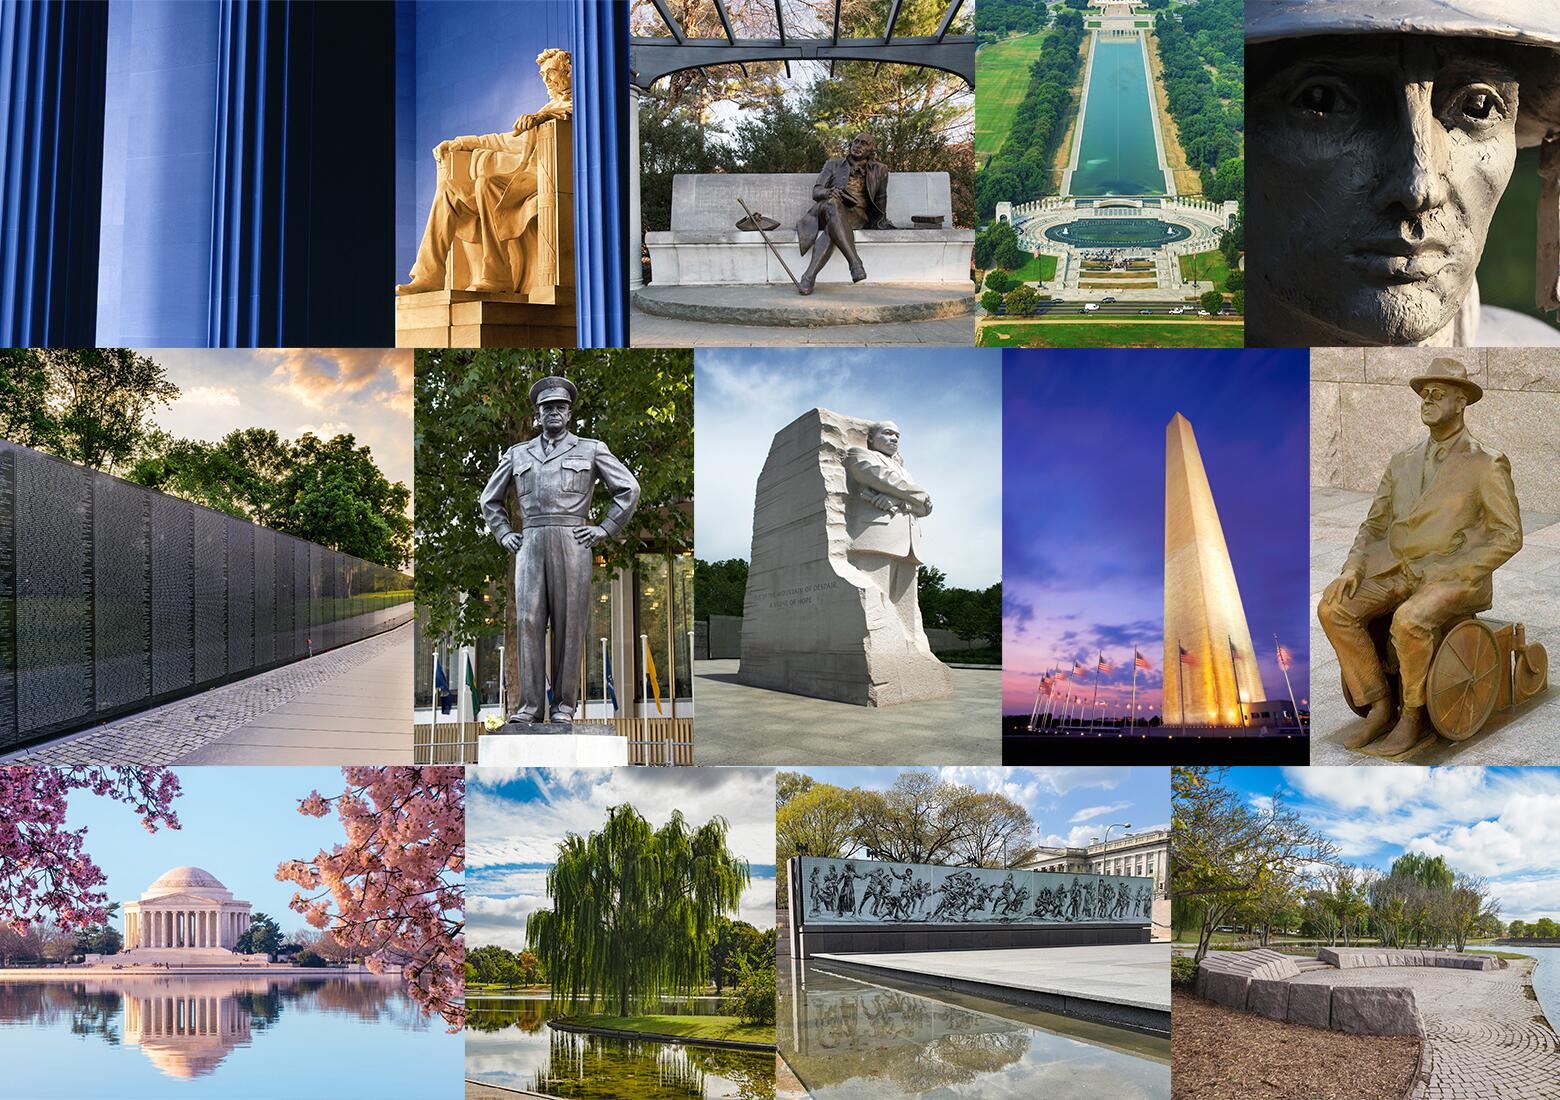 Collage of images of the Monuments from the National Mall.